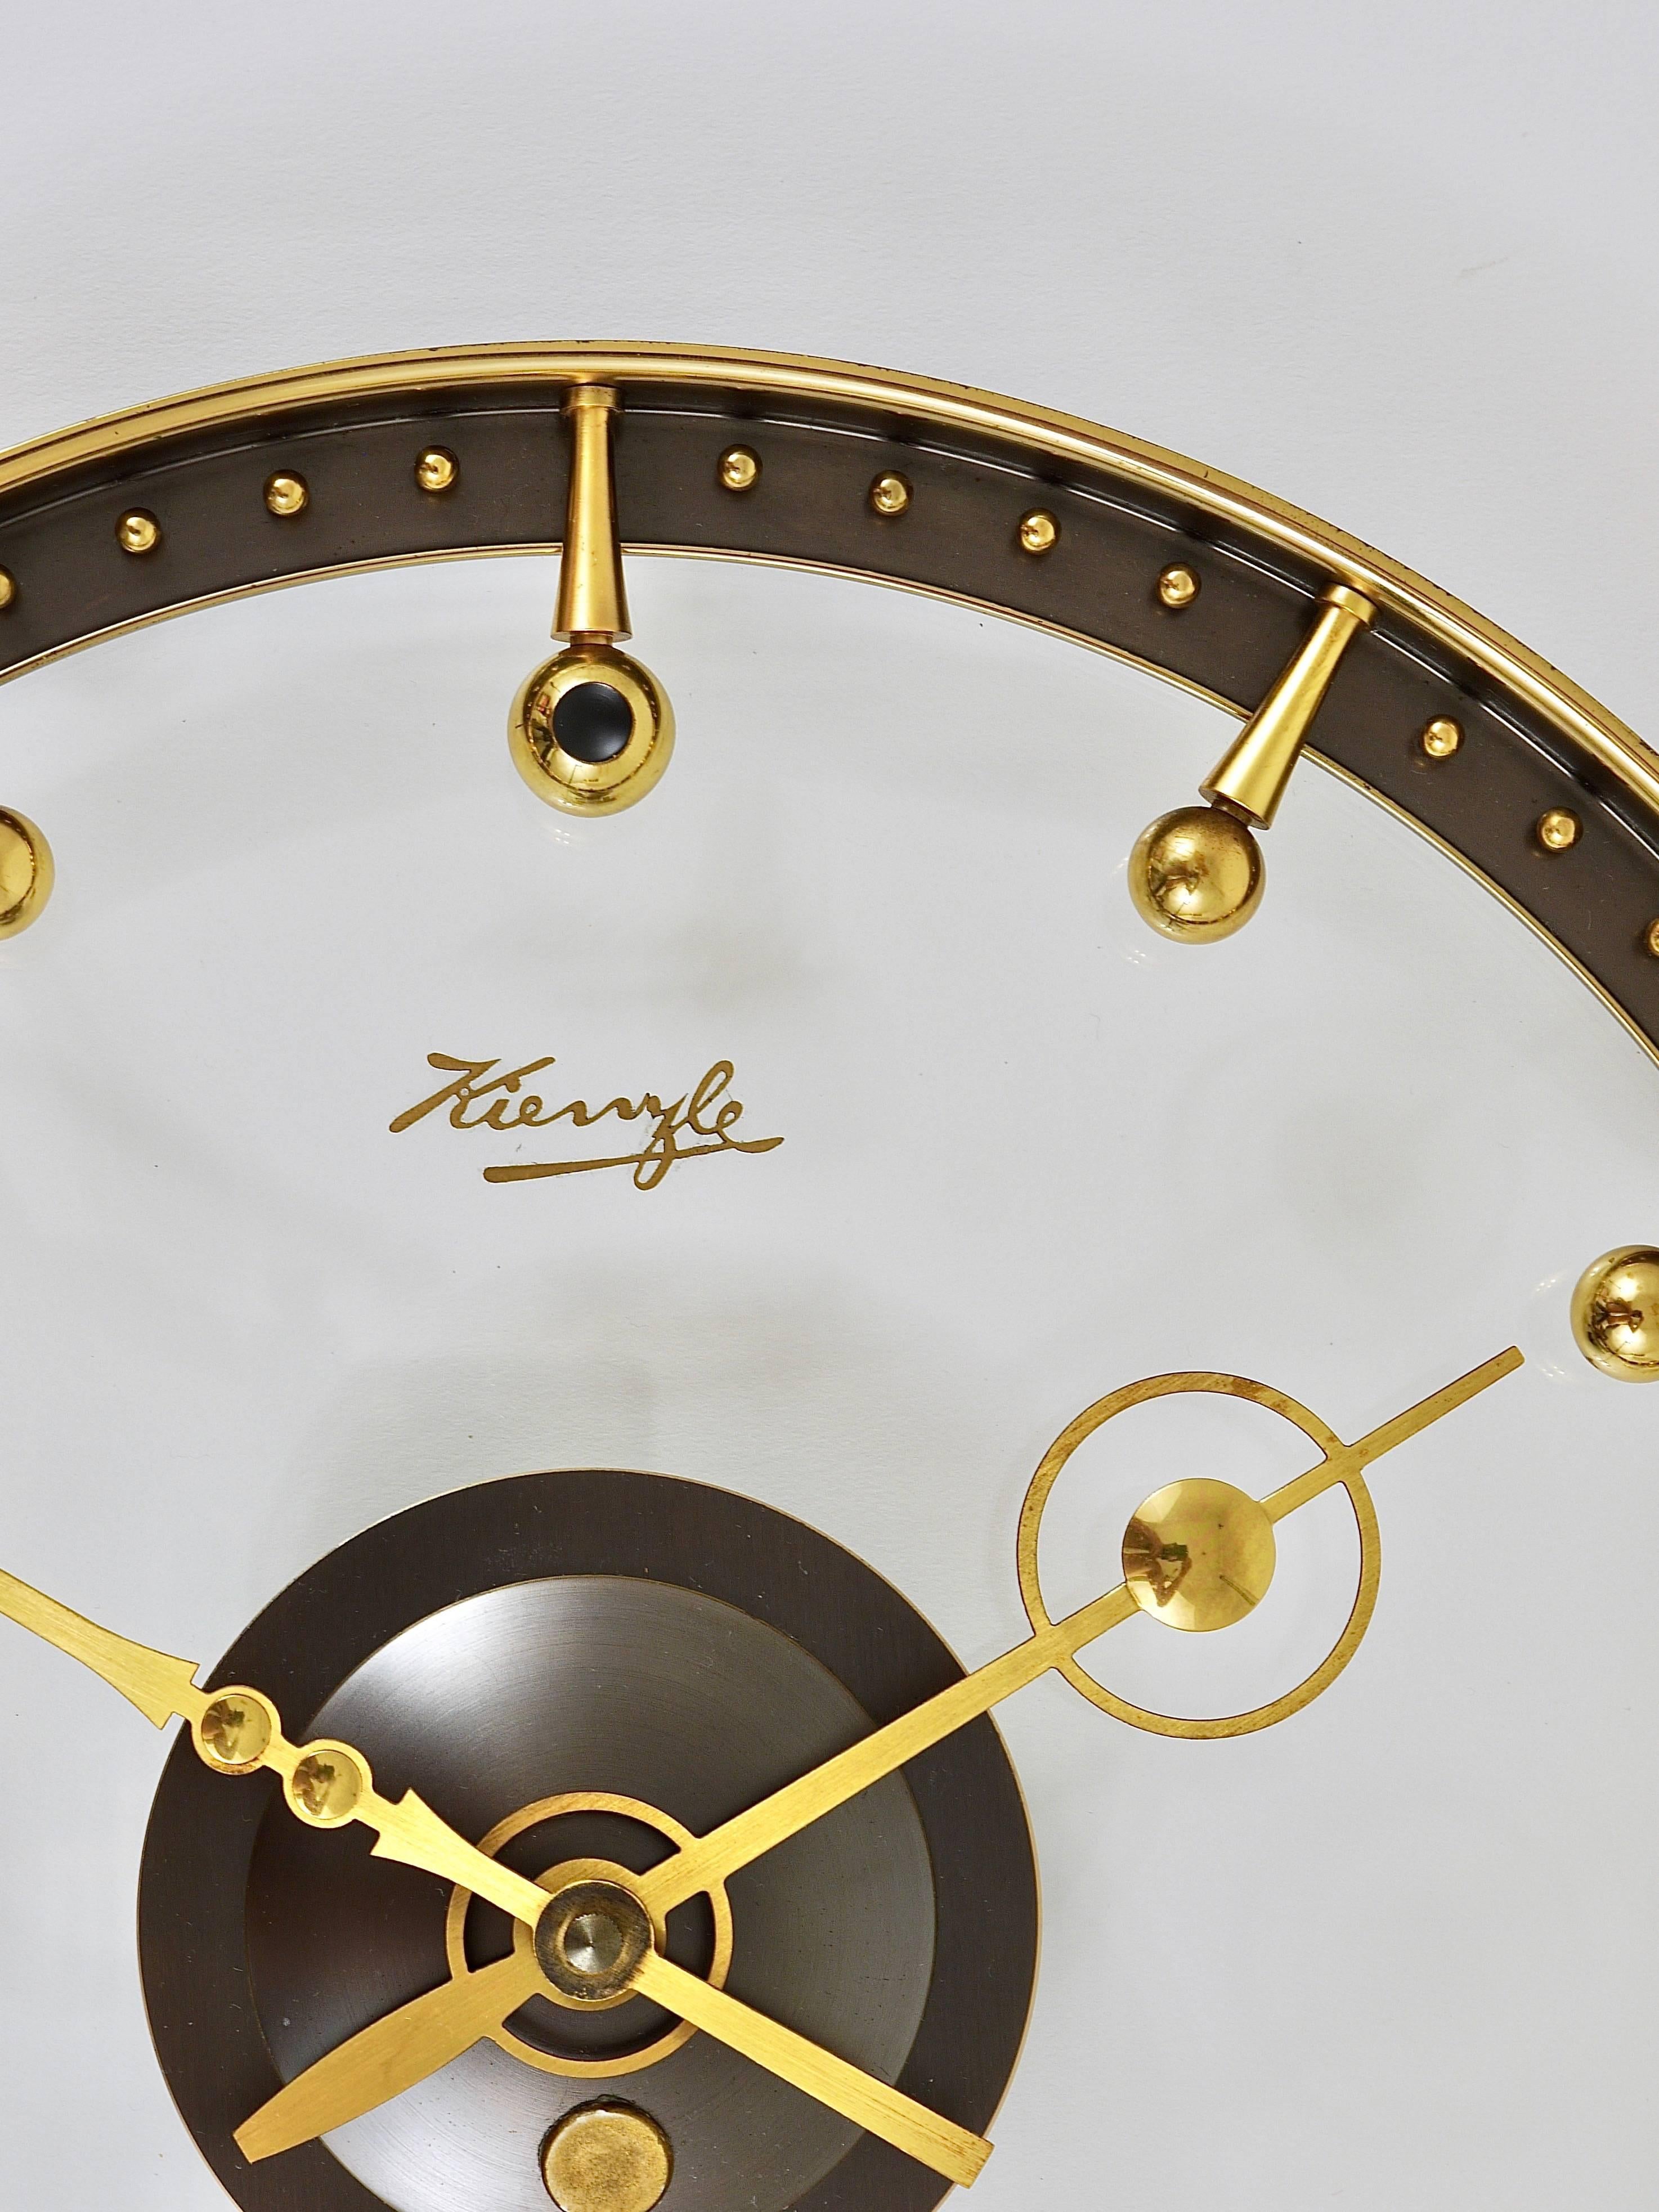 A beautiful and rare modernist wall clock from the 1950s, designed and executed by Kienzle Germany. A very unusual timepiece with a clocks face made of clear glass with stylish details like beautiful brass indices and hands. Powered by a standard